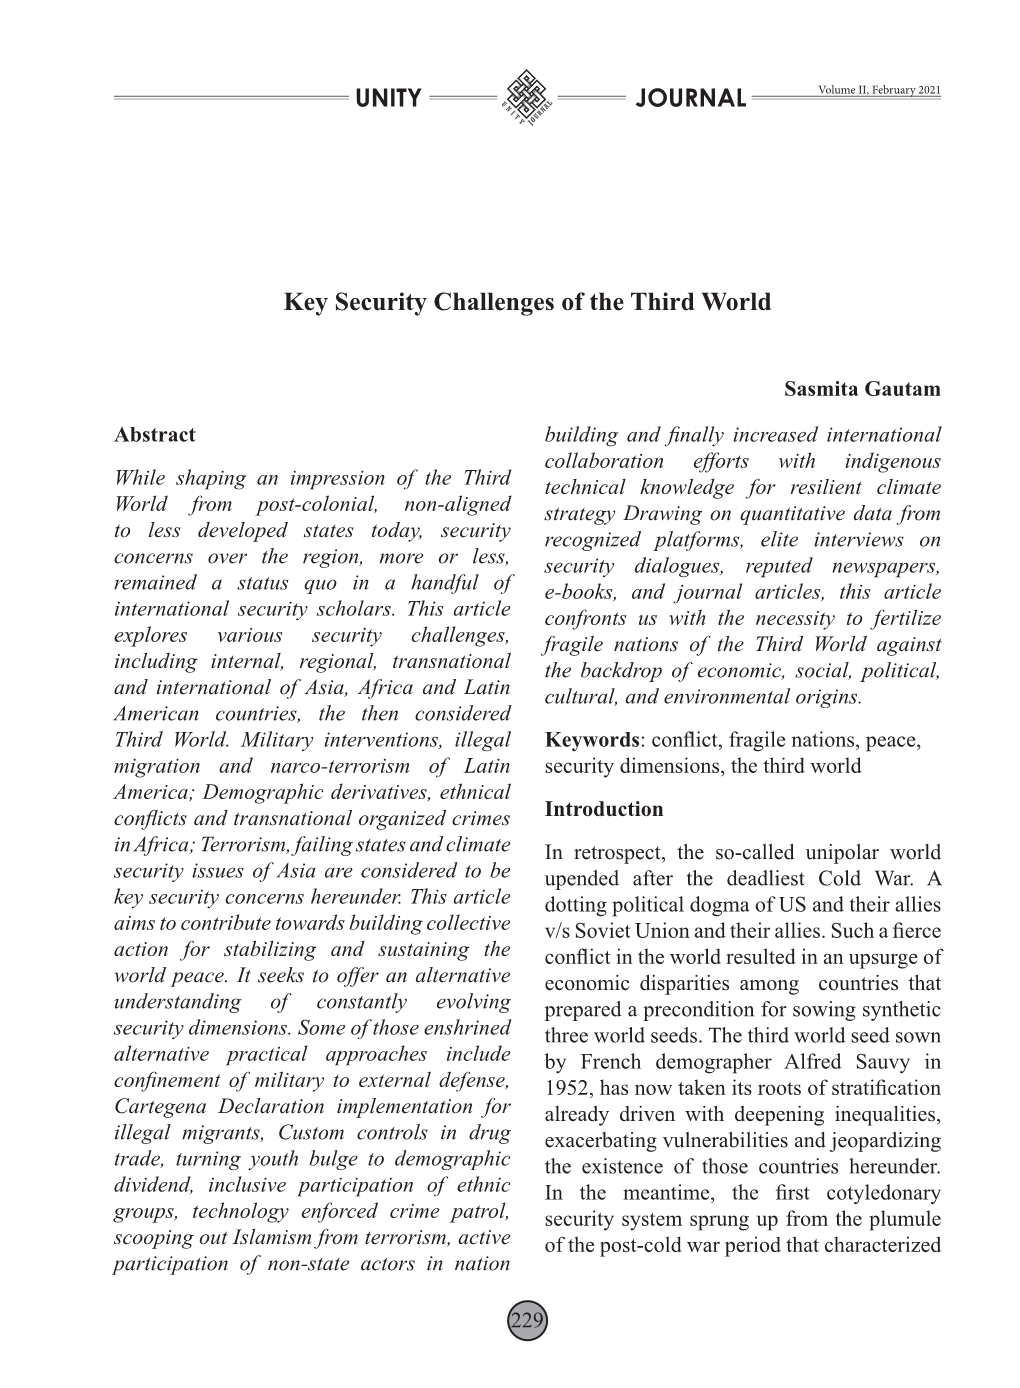 Key Security Challenges of the Third World